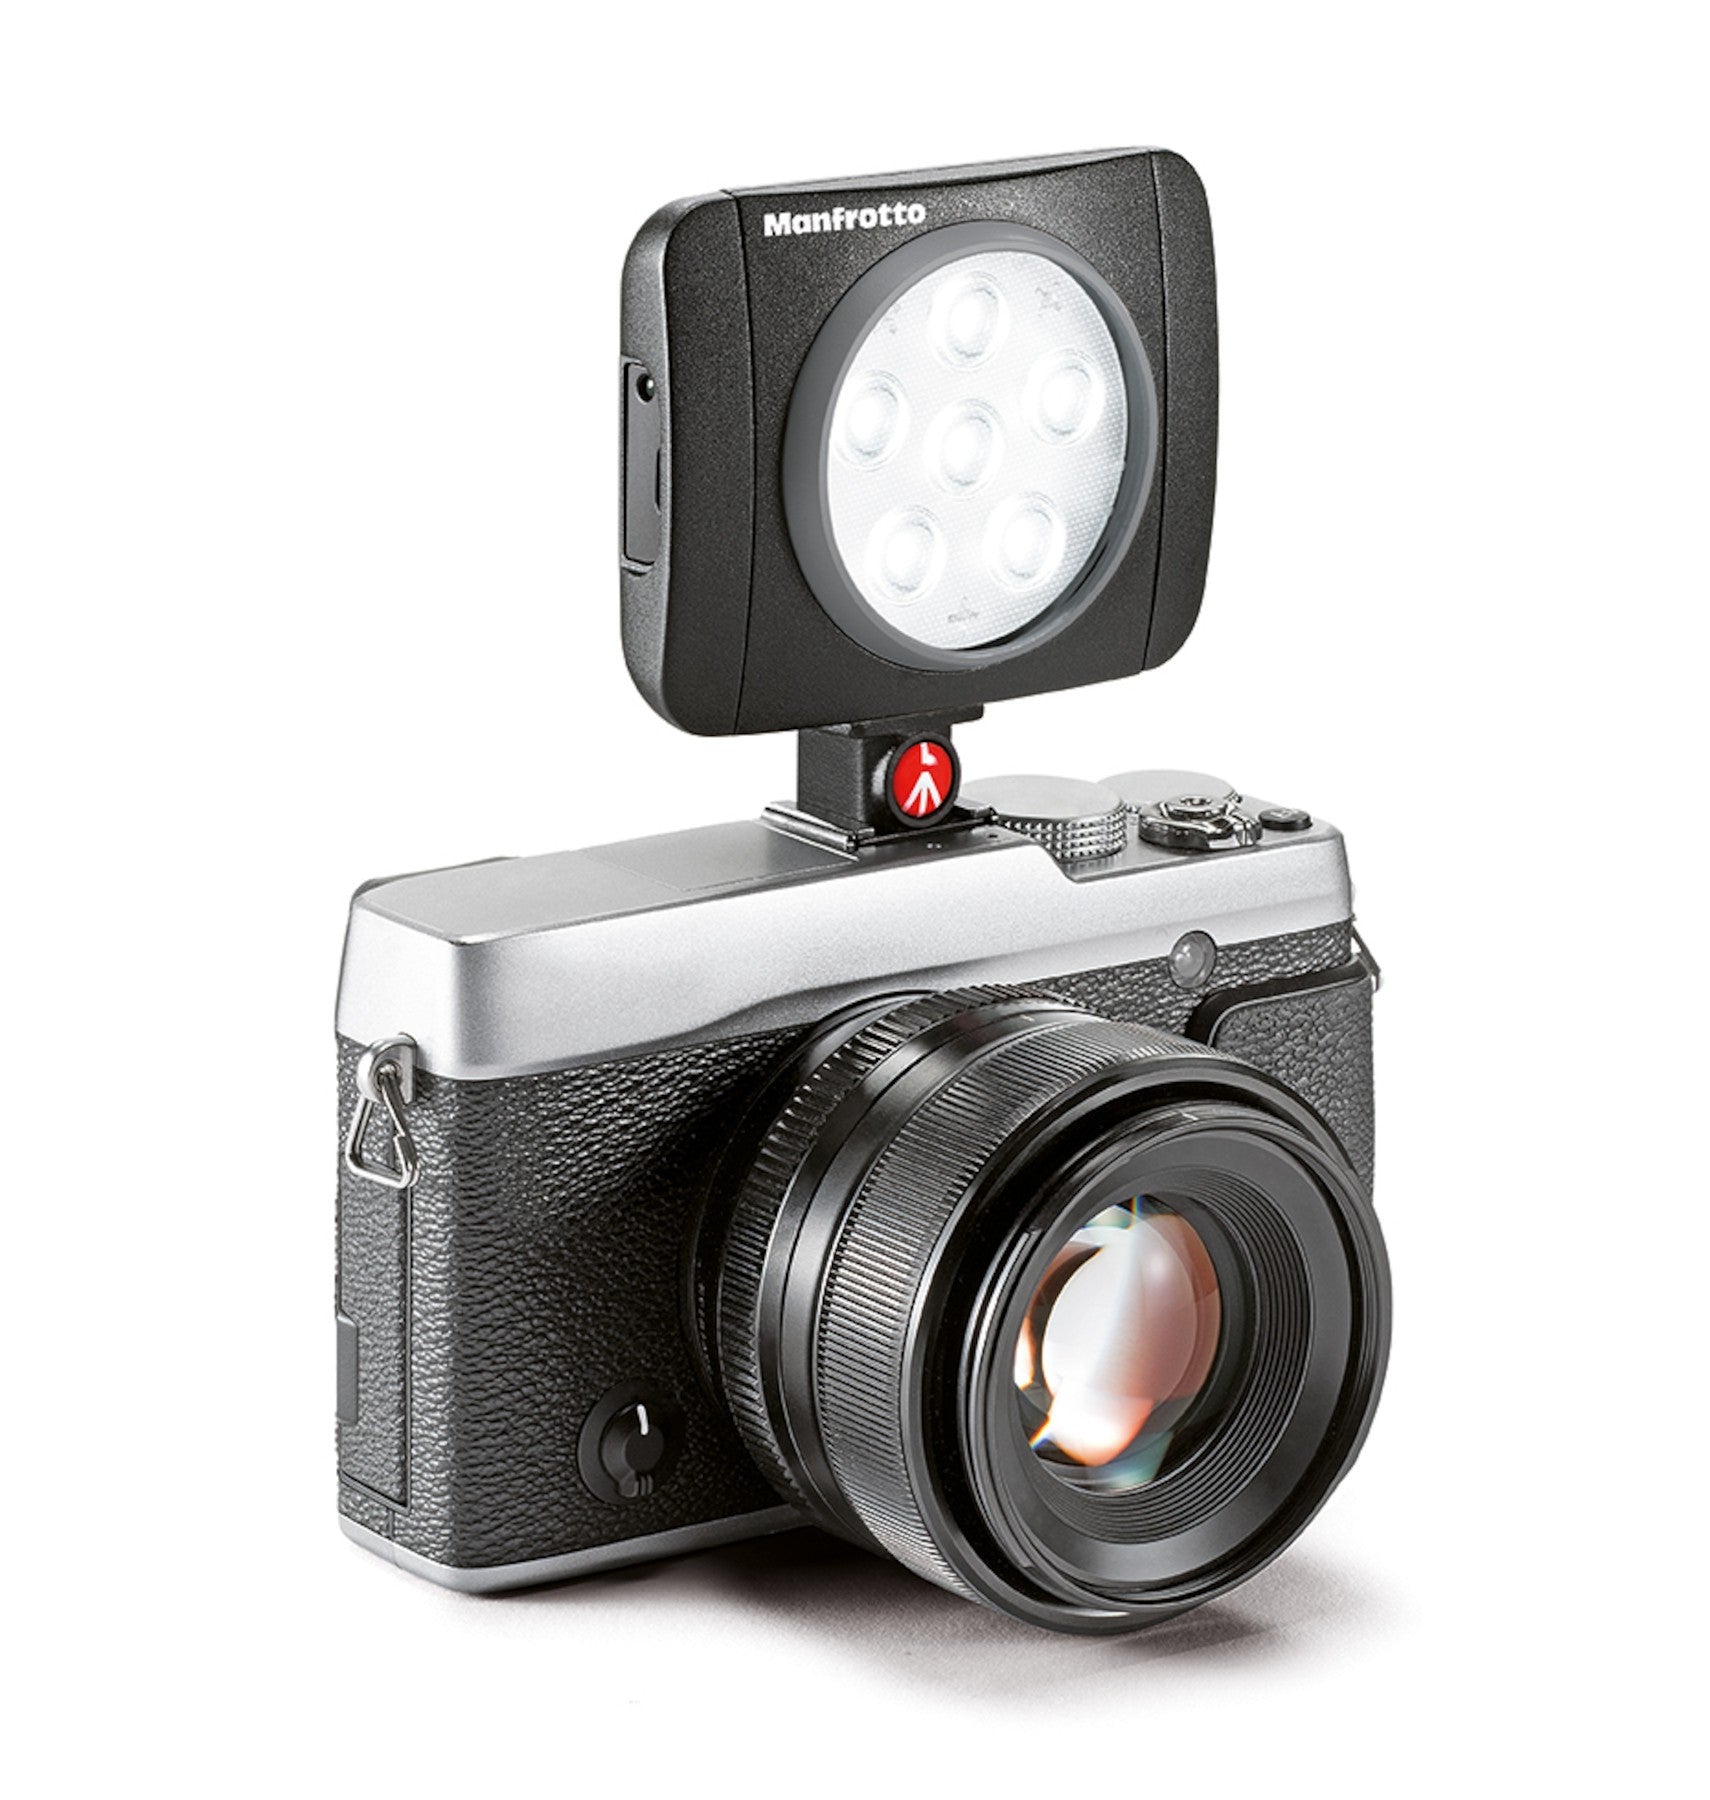 Manfrotto Lumie Series Art LED Light, lighting led lights, Manfrotto - Pictureline  - 2